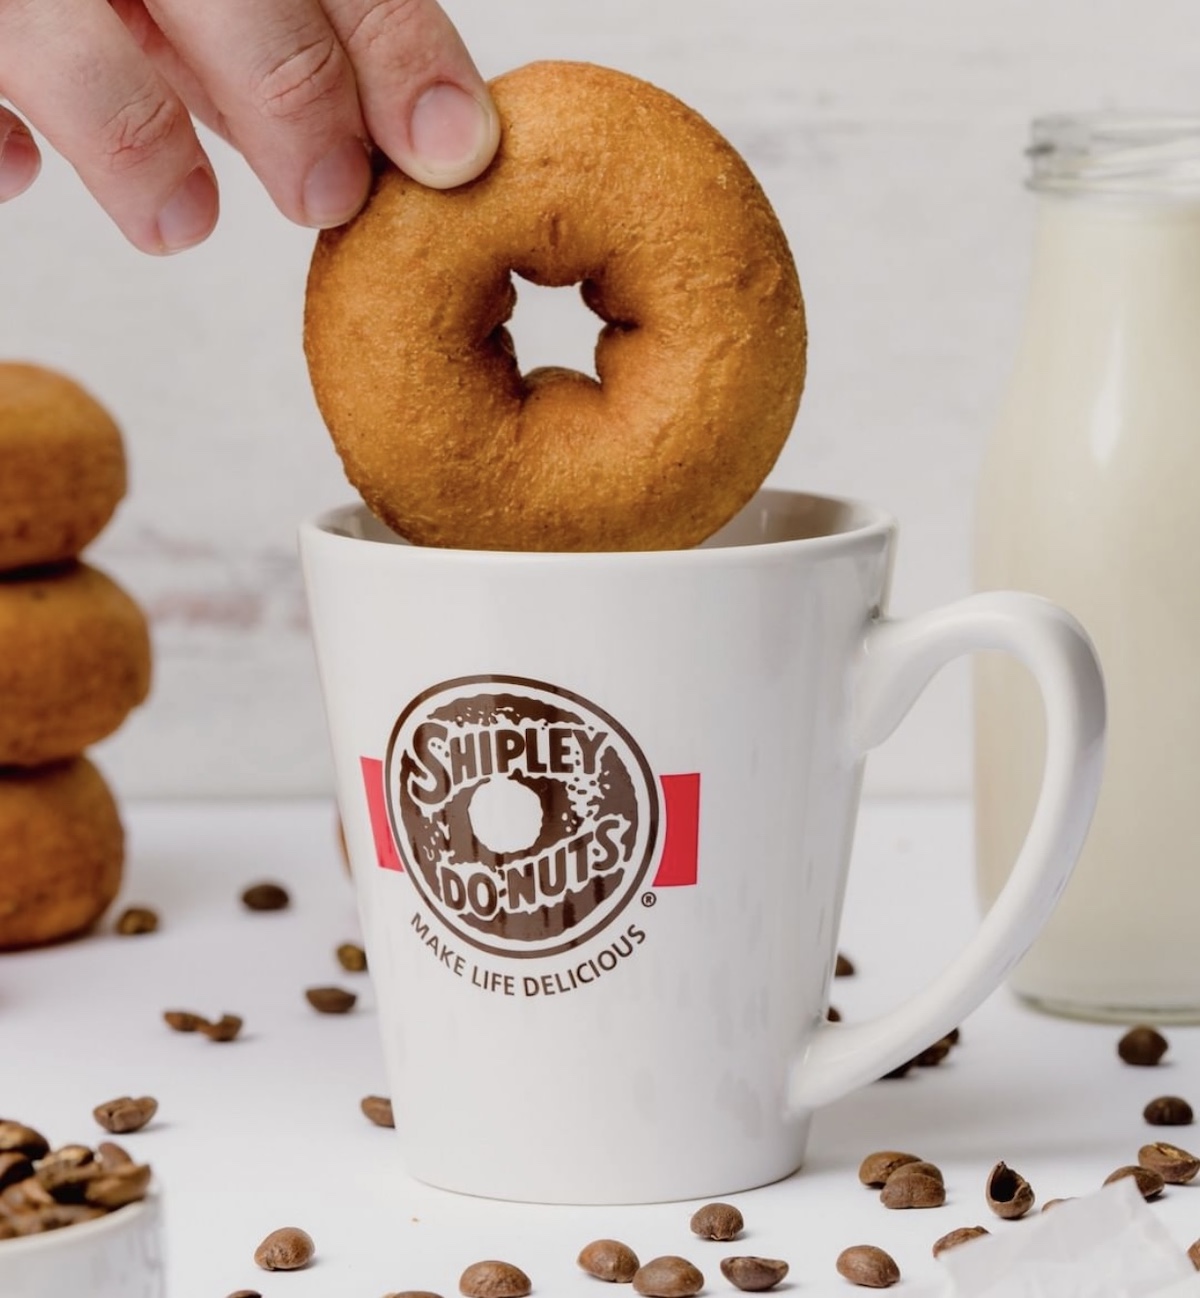 Houston-Based Shipley Do-Nuts Opening 30 Georgia Locations Starting in Duluth - Photo